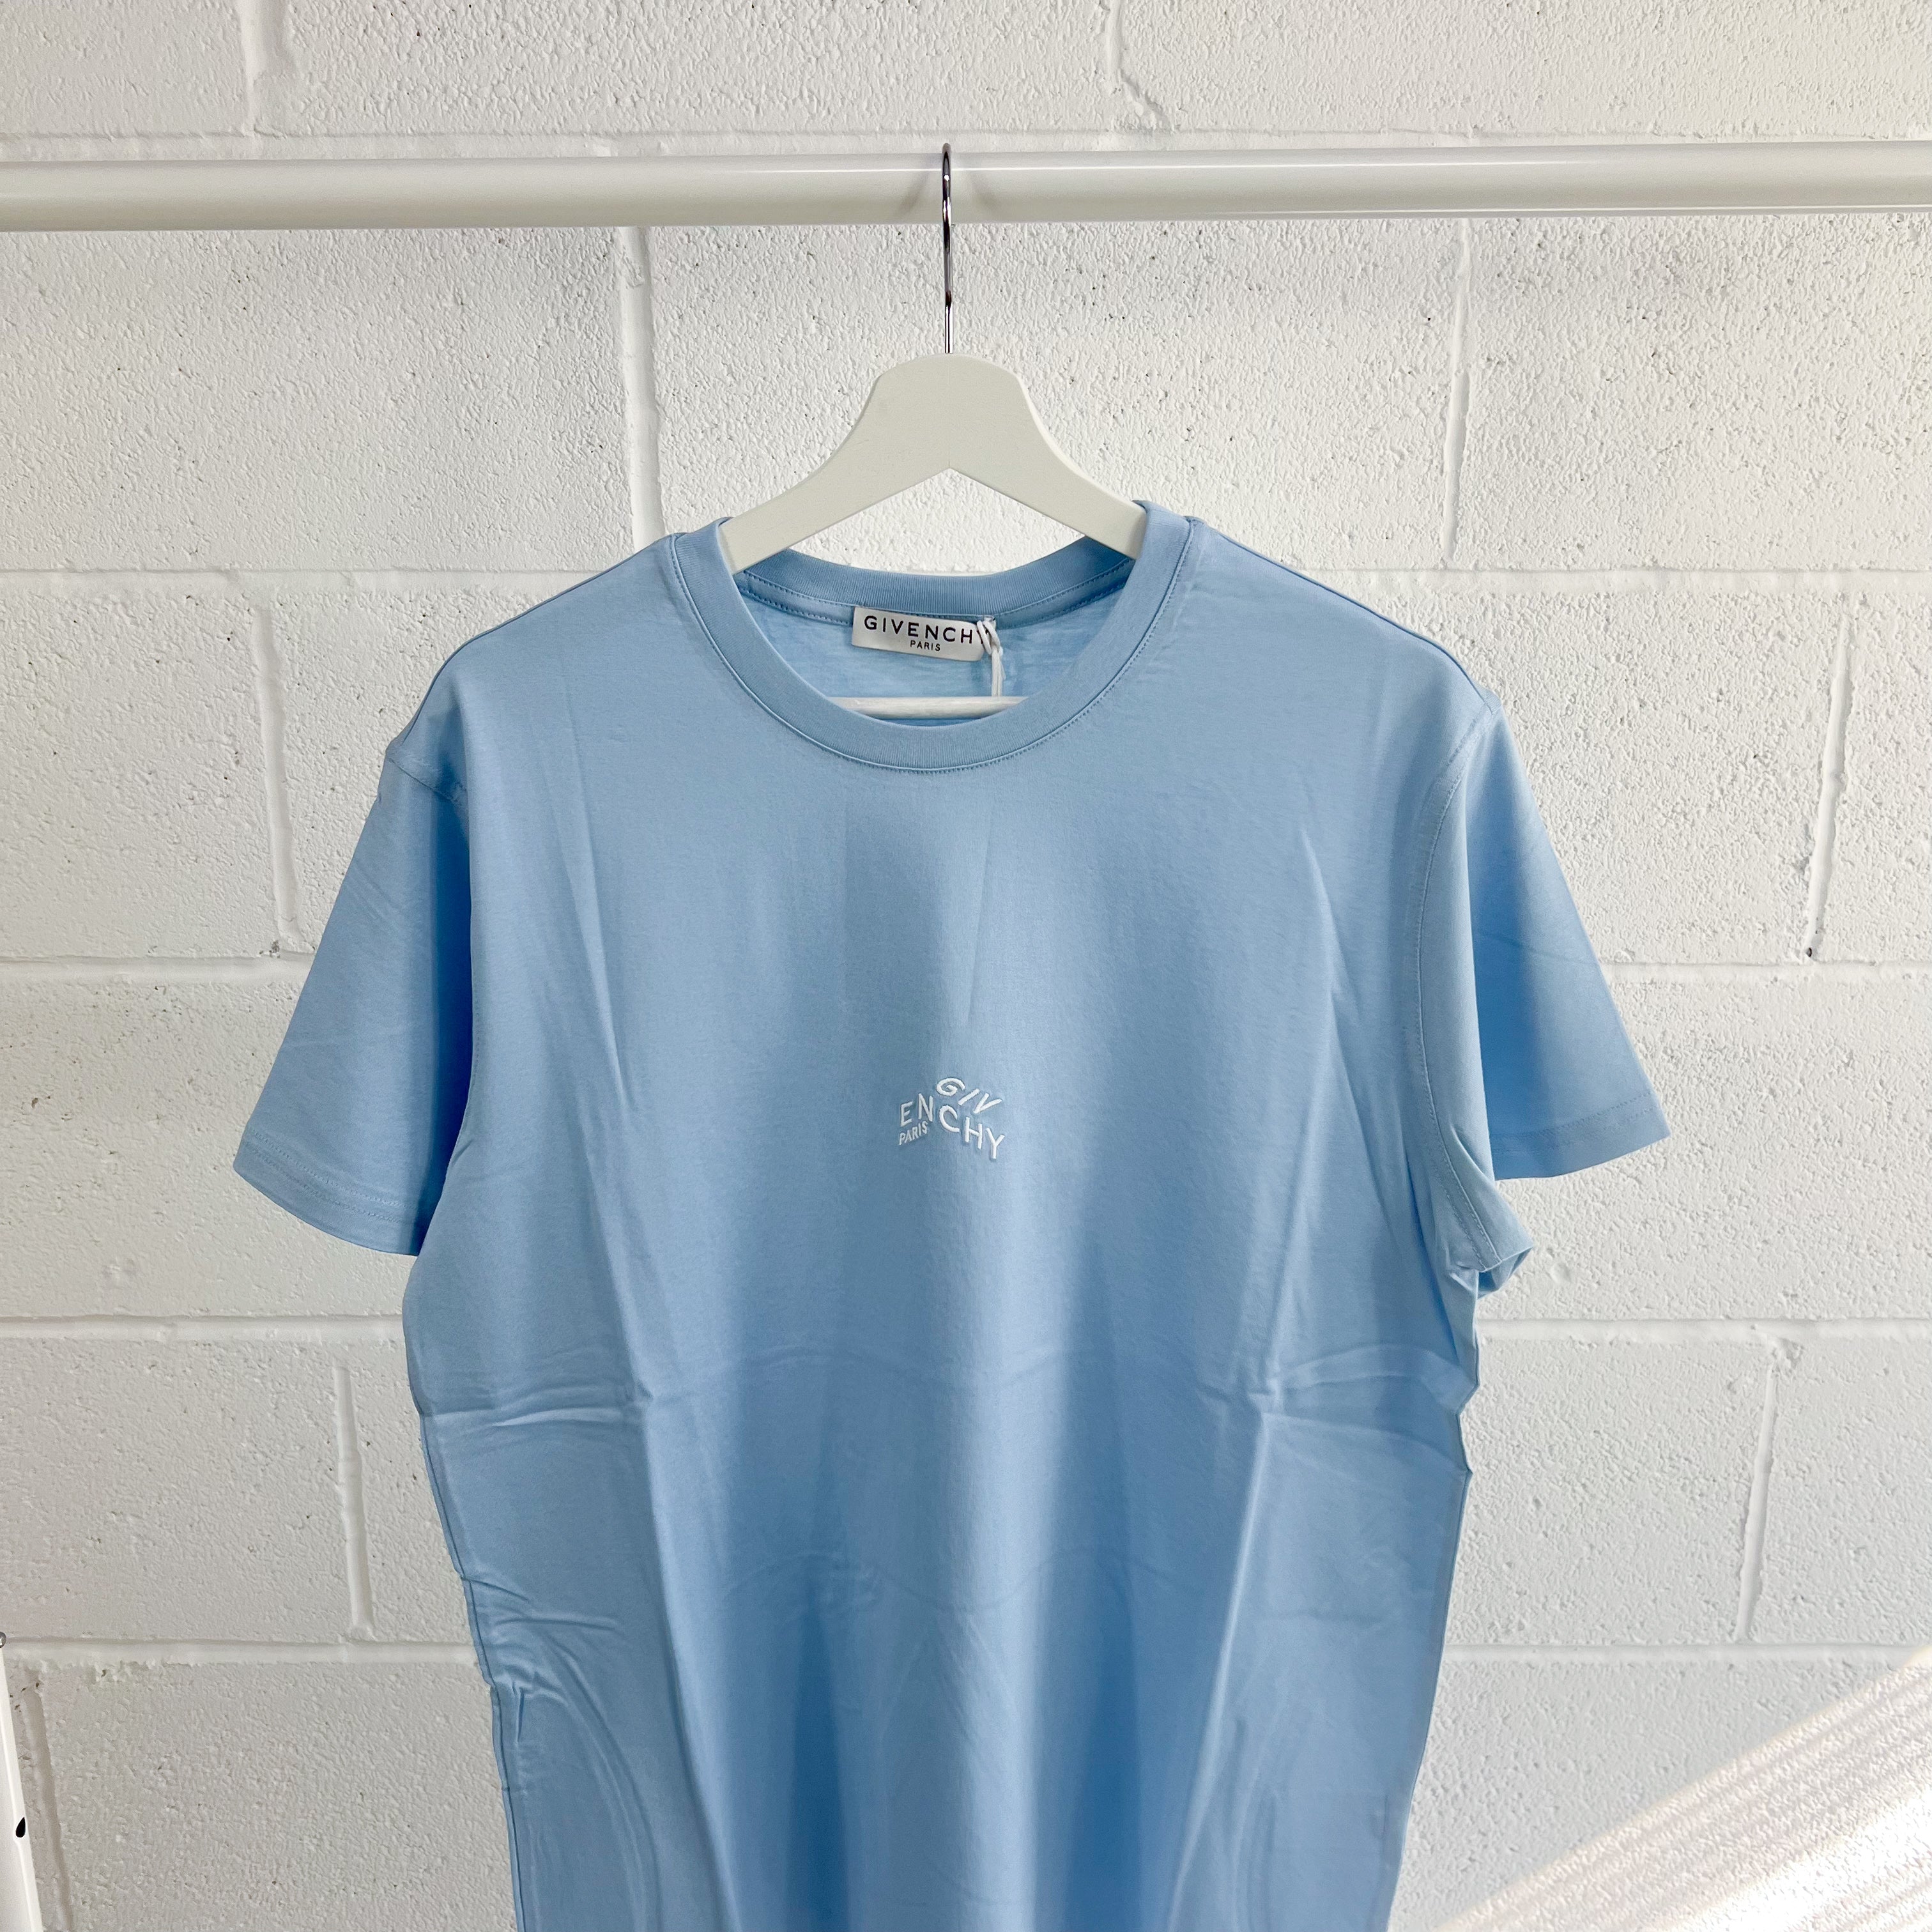 Givenchy Mini Refracted Embroidery Tee - Baby Blue